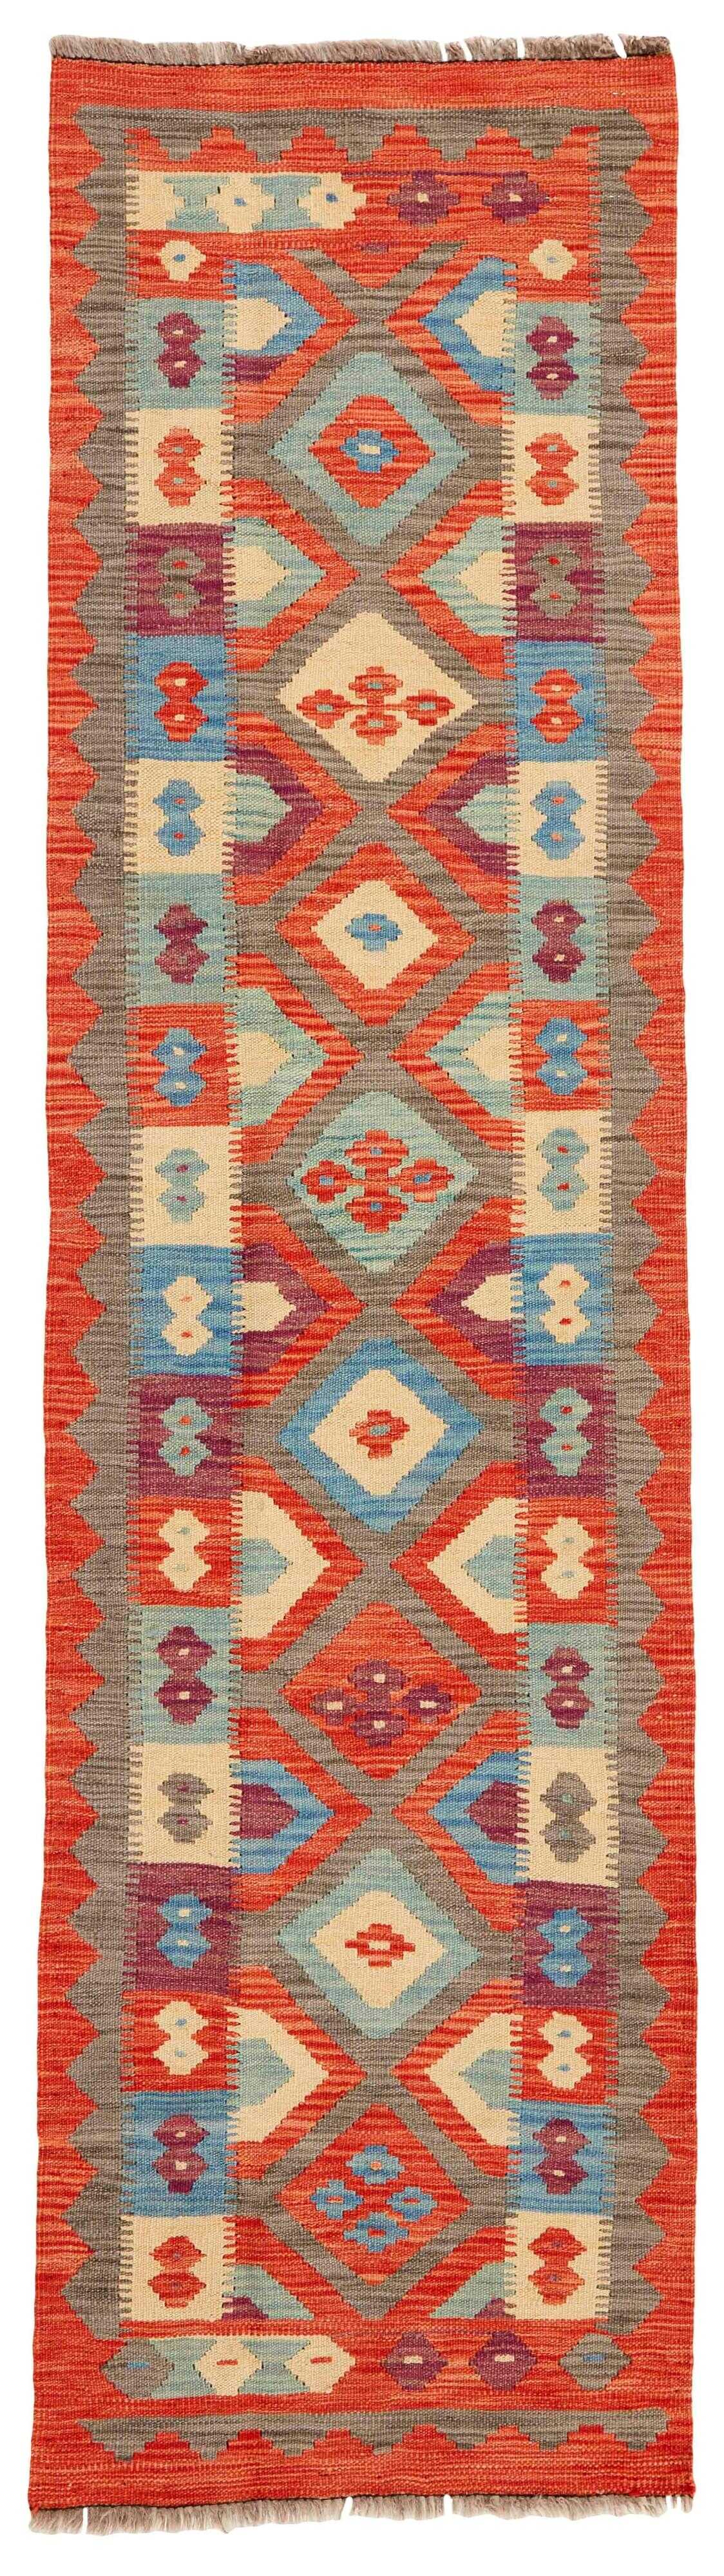 Authentic oriental runner with traditional multicolour geometric pattern in blue, yellow, orange and red